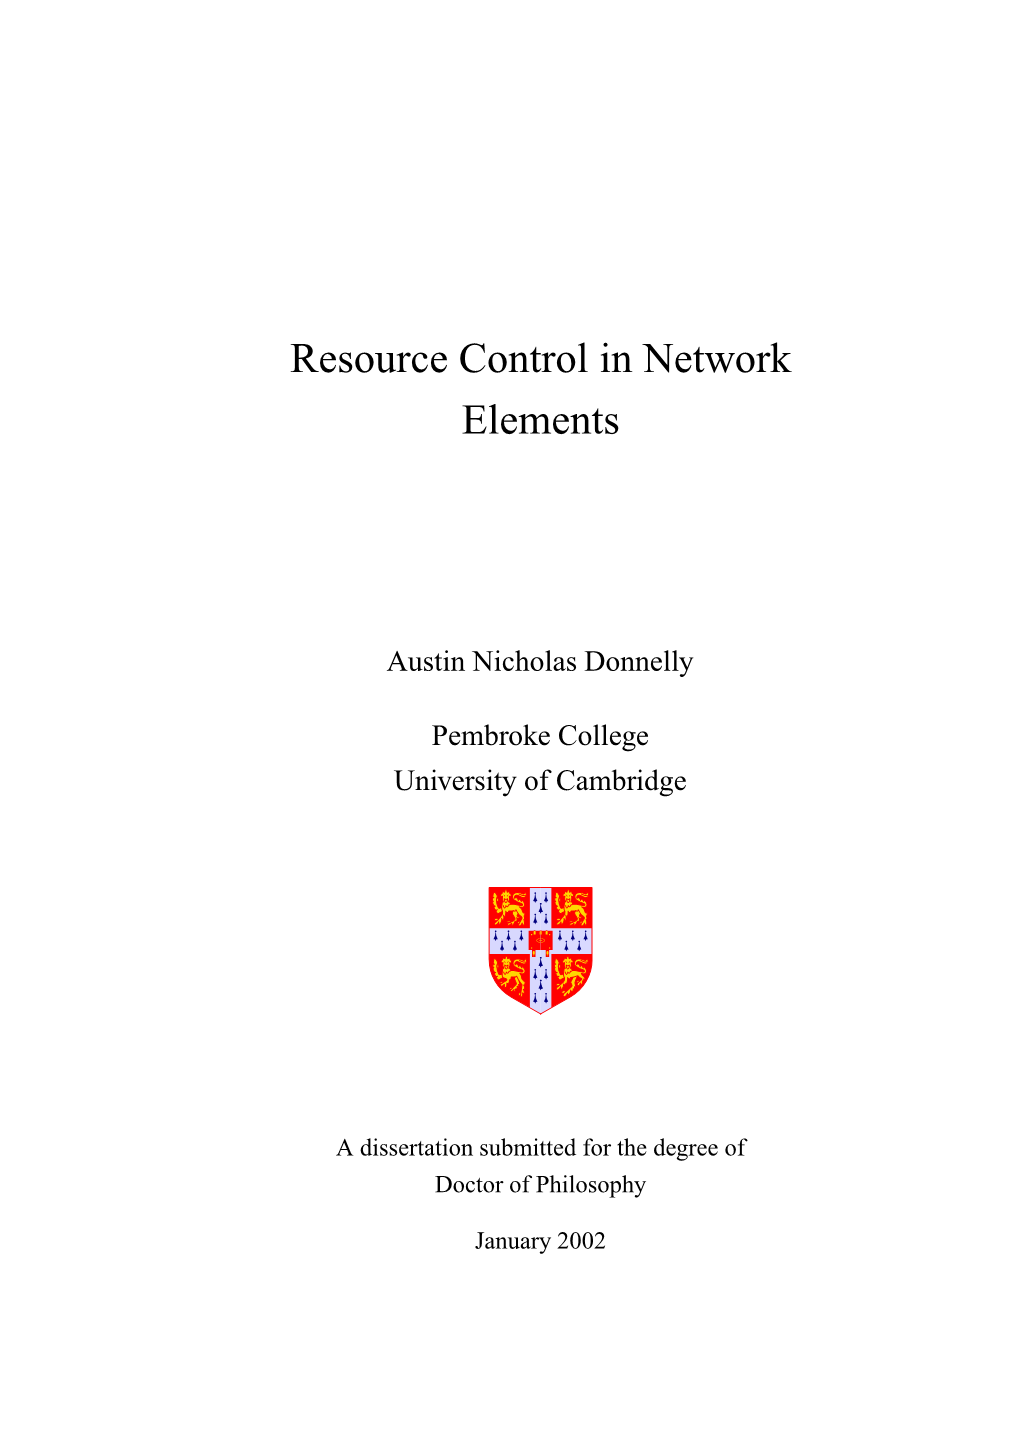 Resource Control in Network Elements